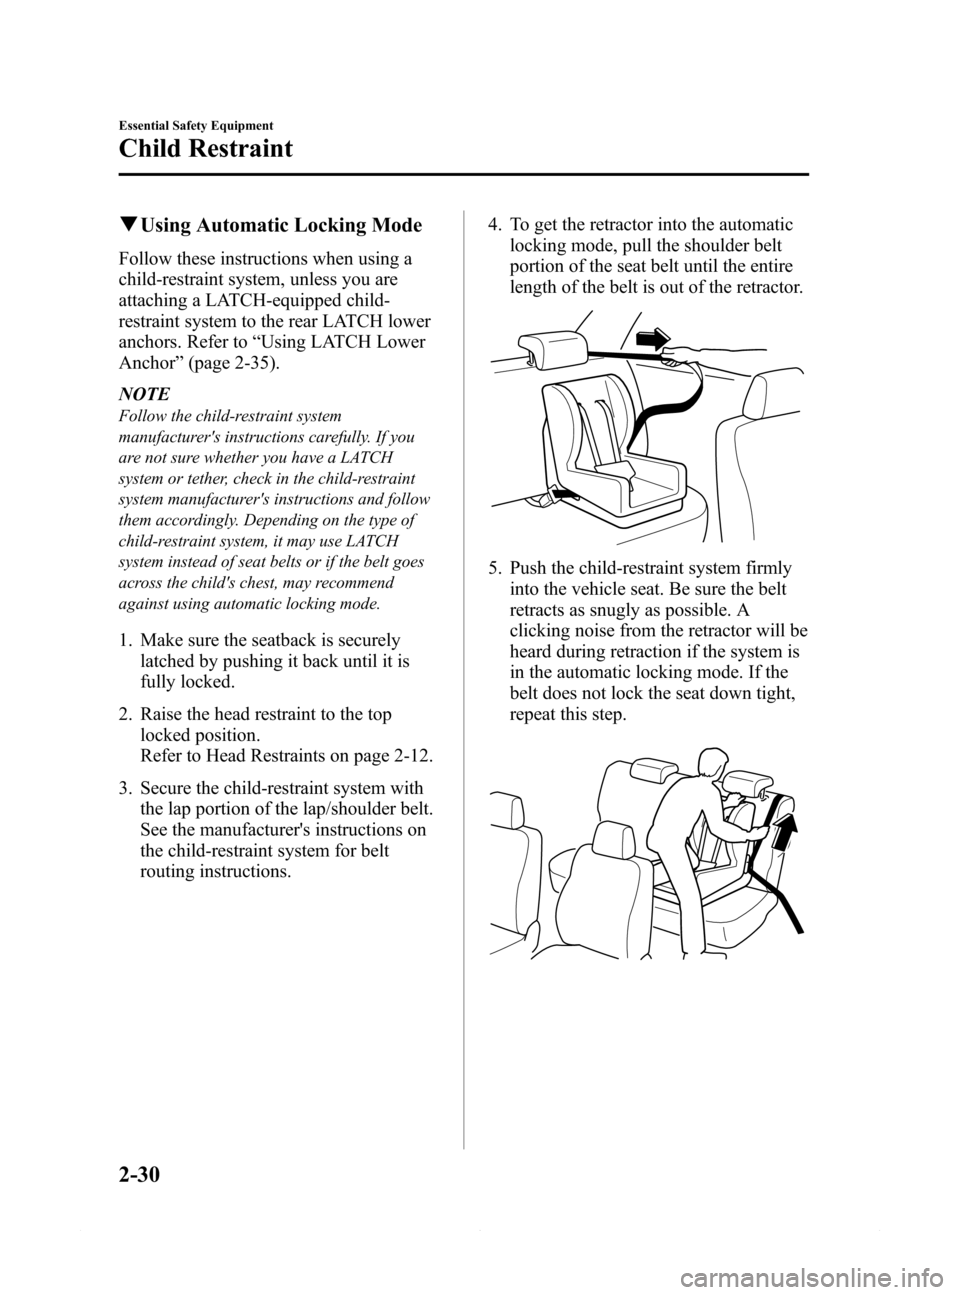 MAZDA MODEL 6 2015  Owners Manual (in English) Black plate (42,1)
qUsing Automatic Locking Mode
Follow these instructions when using a
child-restraint system, unless you are
attaching a LATCH-equipped child-
restraint system to the rear LATCH lowe